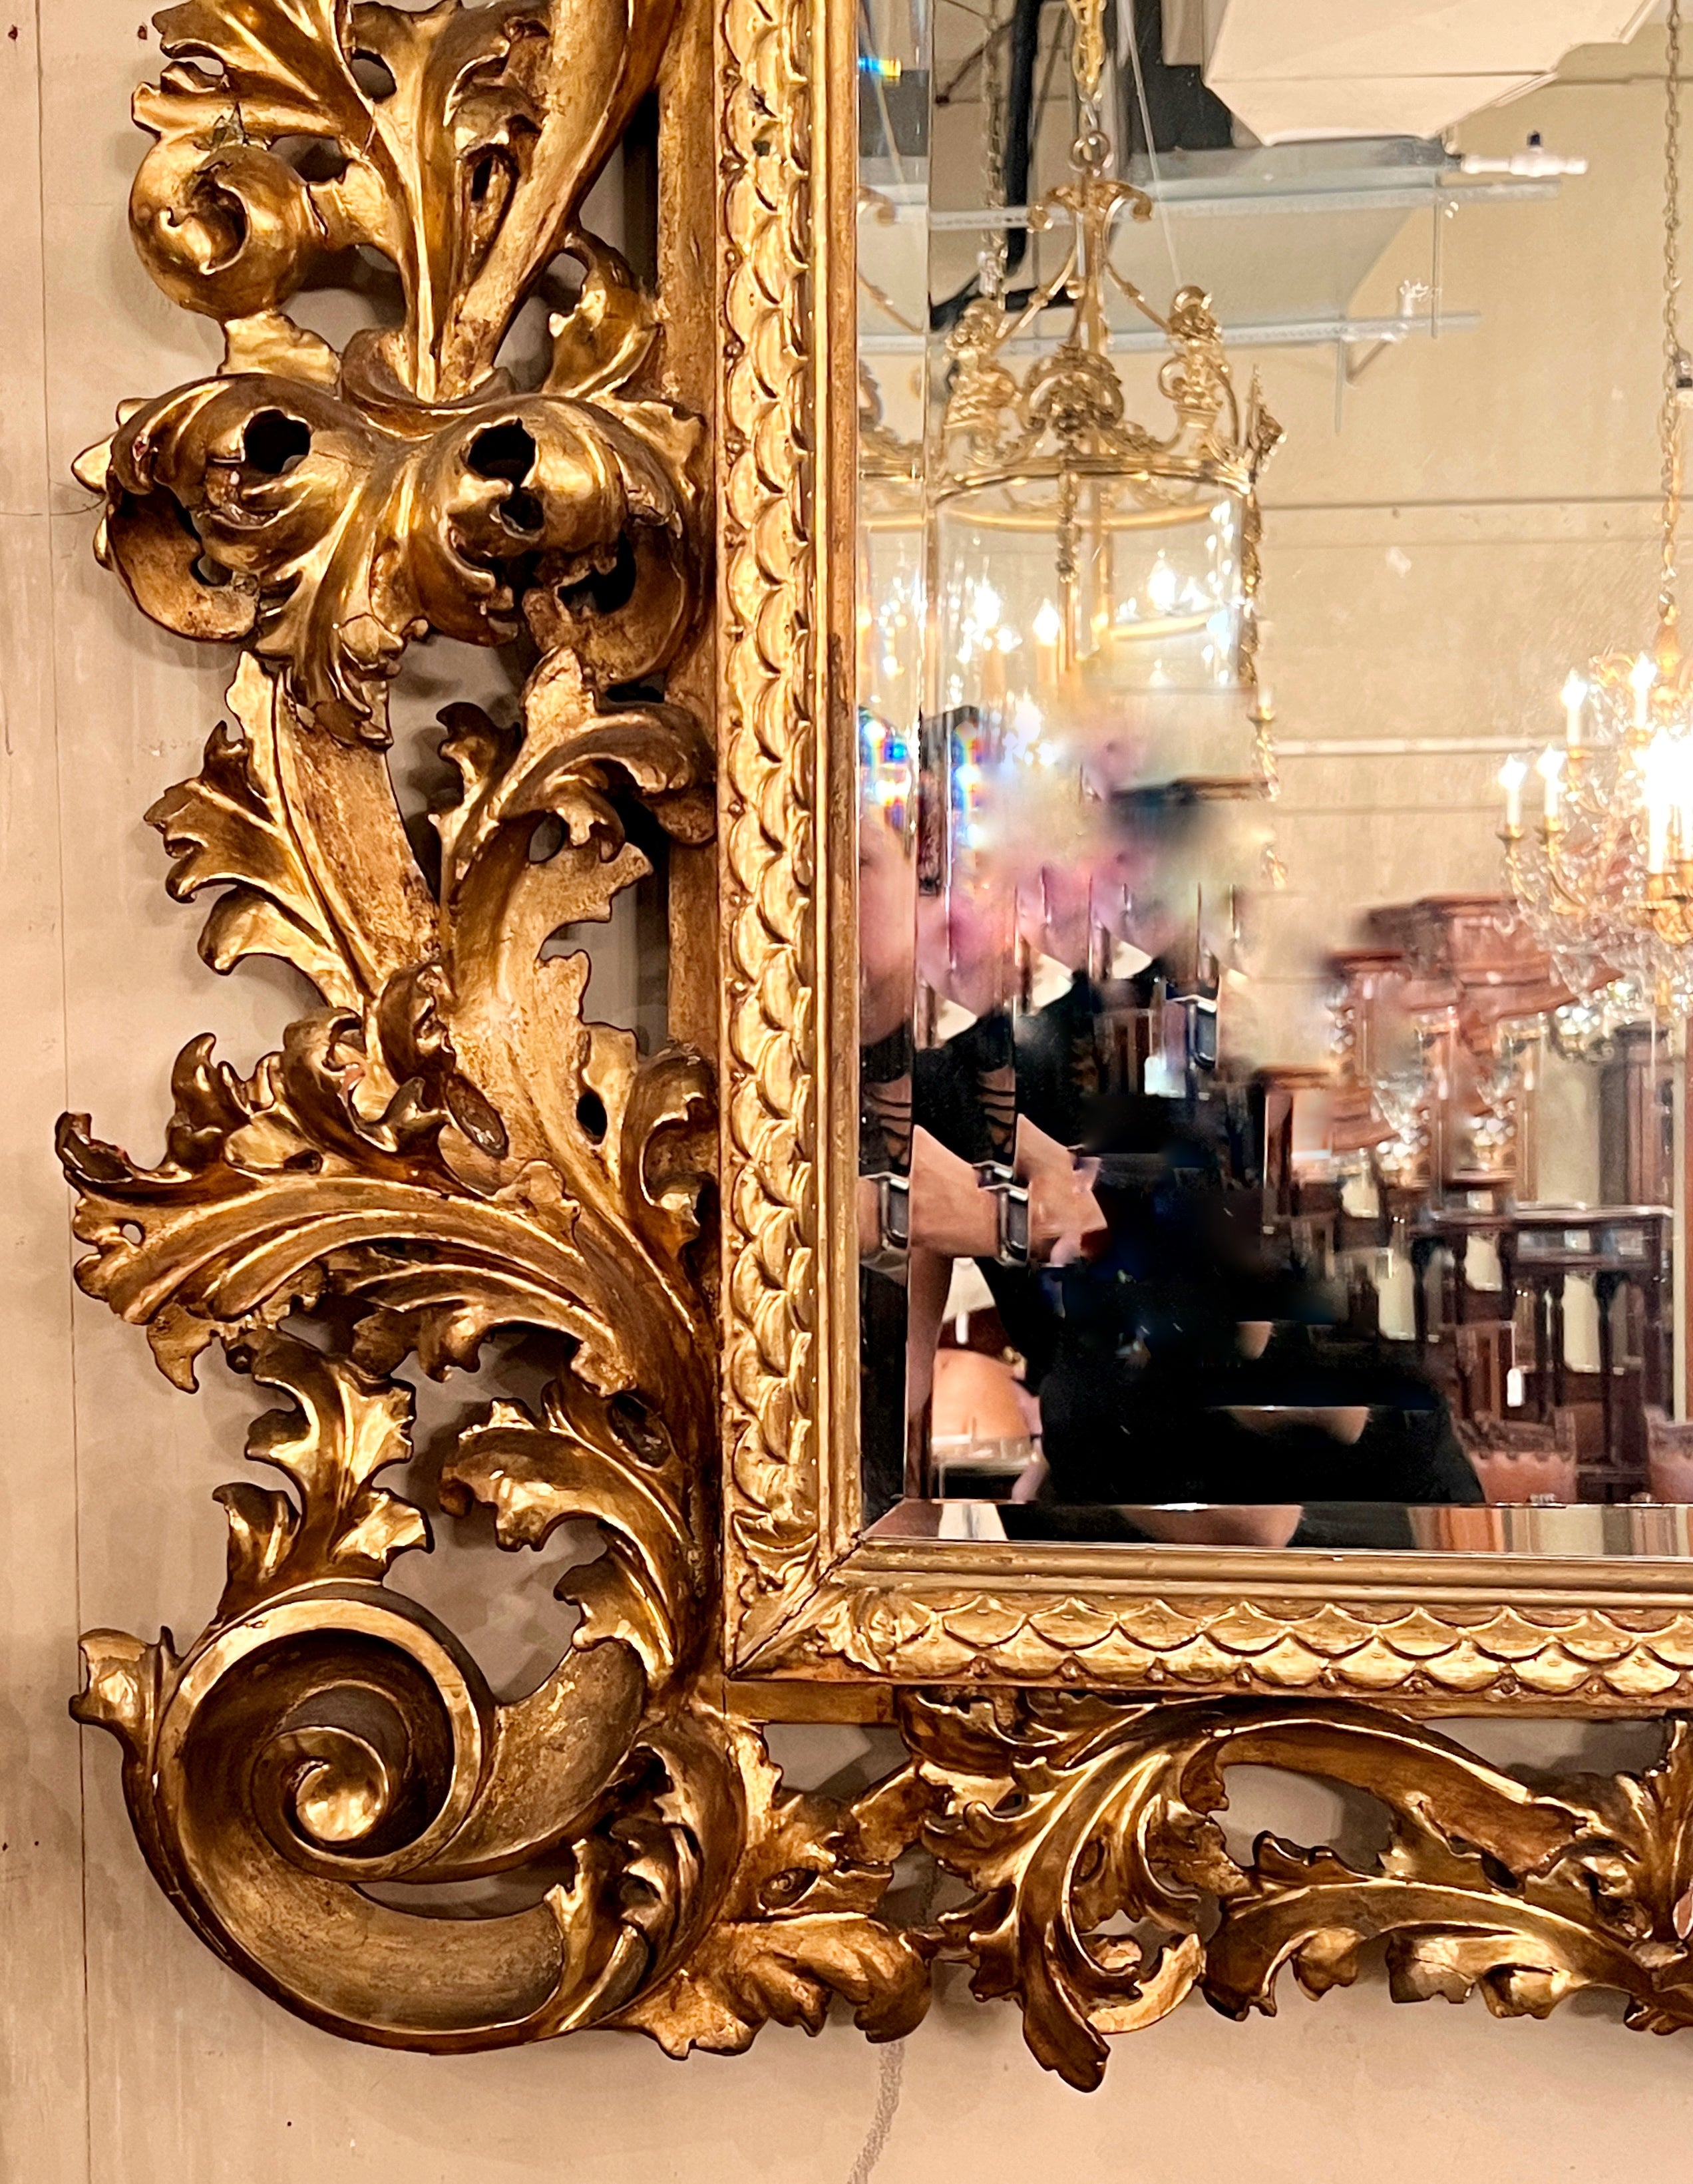 Antique 19th Century Venetian Carved Gilt Wood Framed Beveled Mirror.
This piece is palatial in size with magnificent carving and a substantial cartouche.